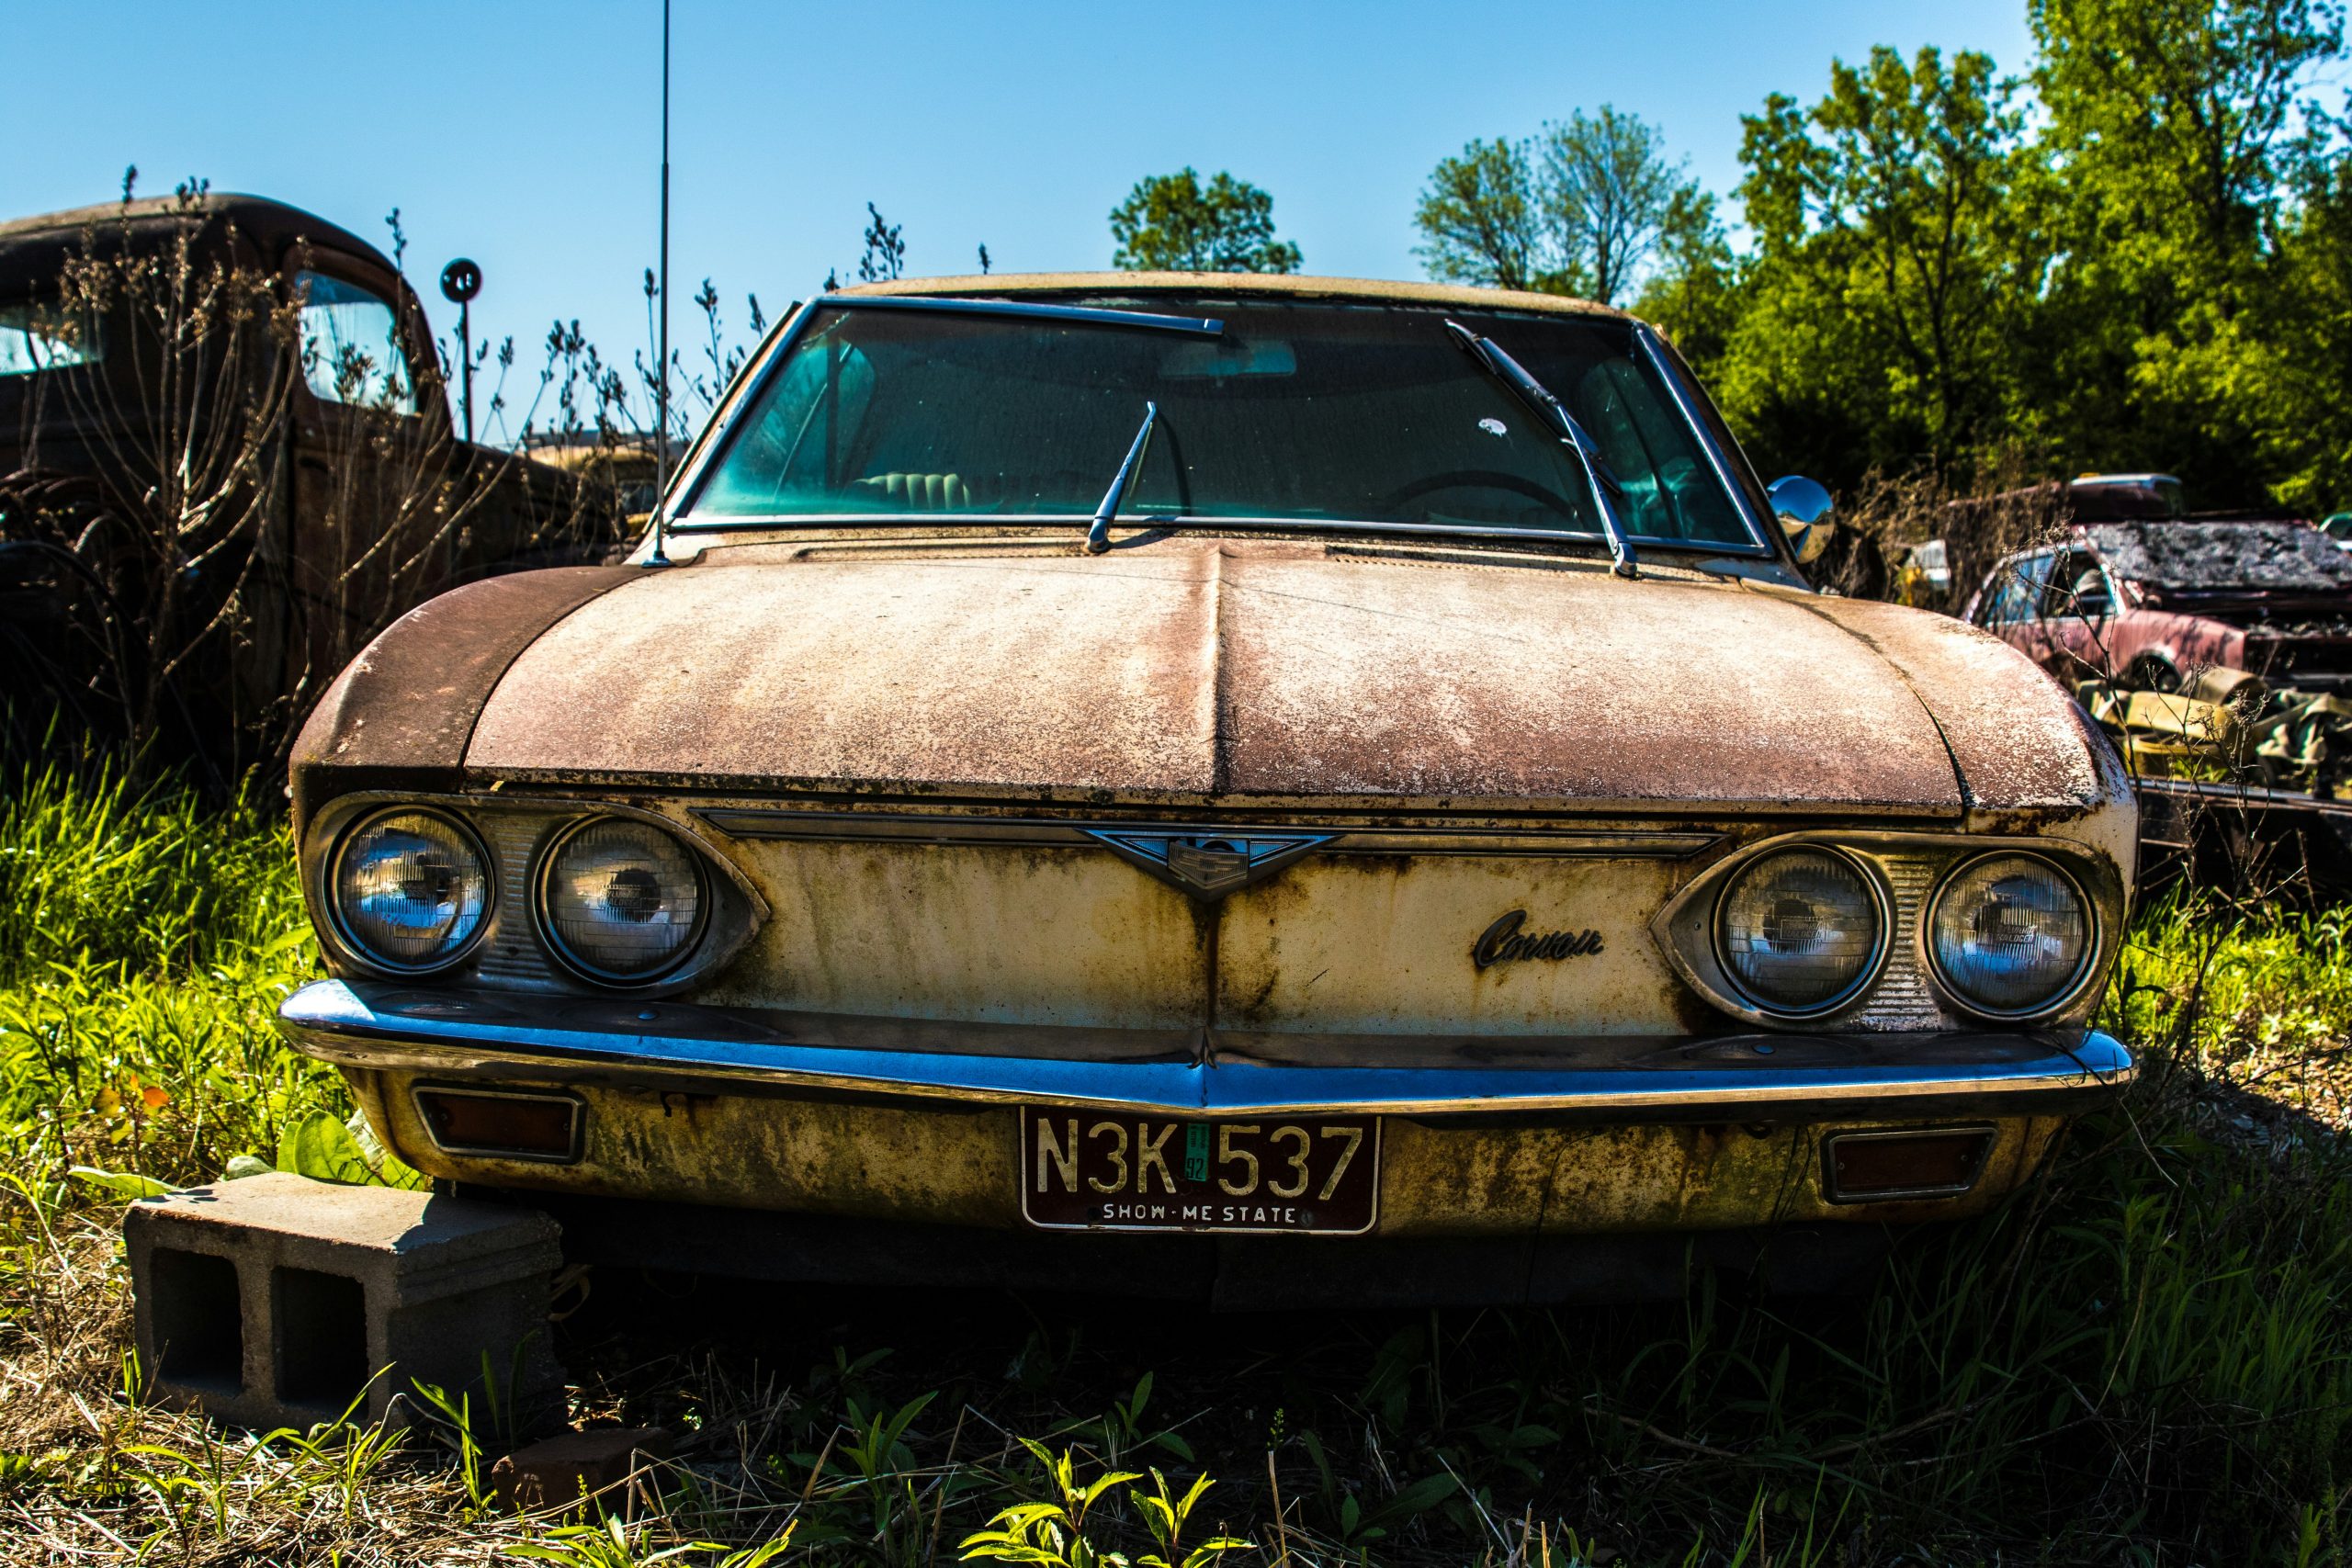 Turn Your Junk Car into Cash: The Ultimate Solution with Cash for Cars in Temecula!